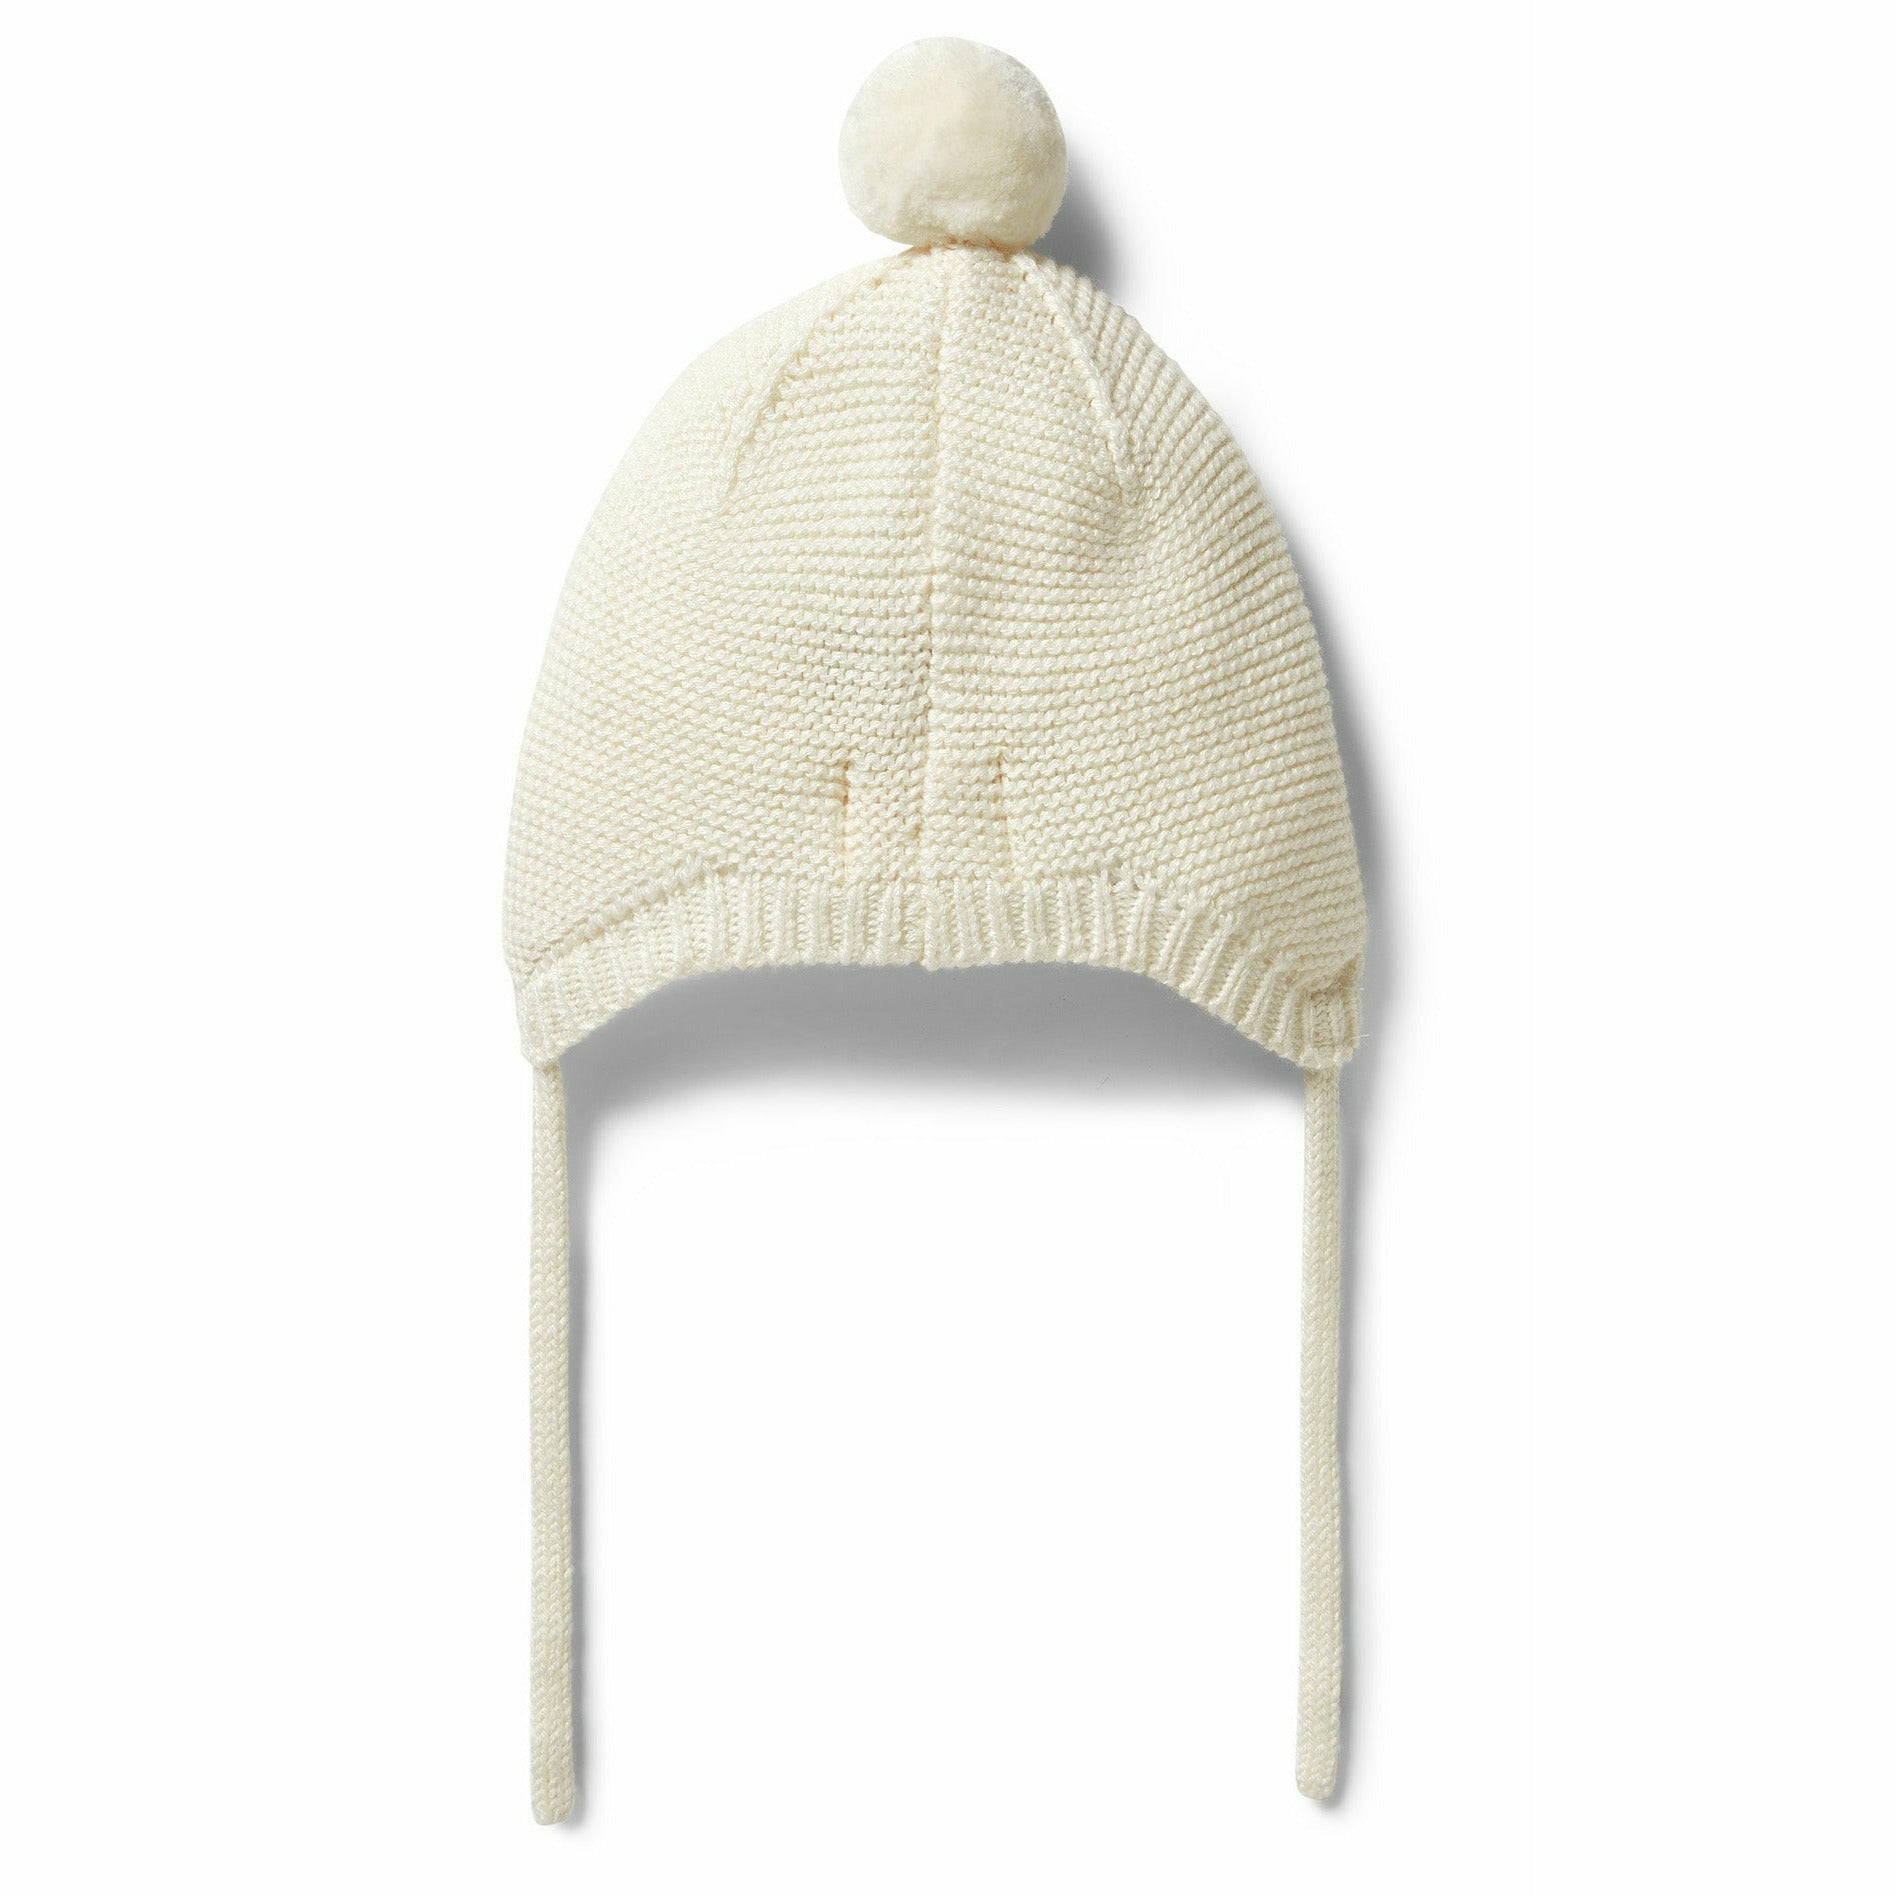 Knitted Cable Bonnet - Gardenia